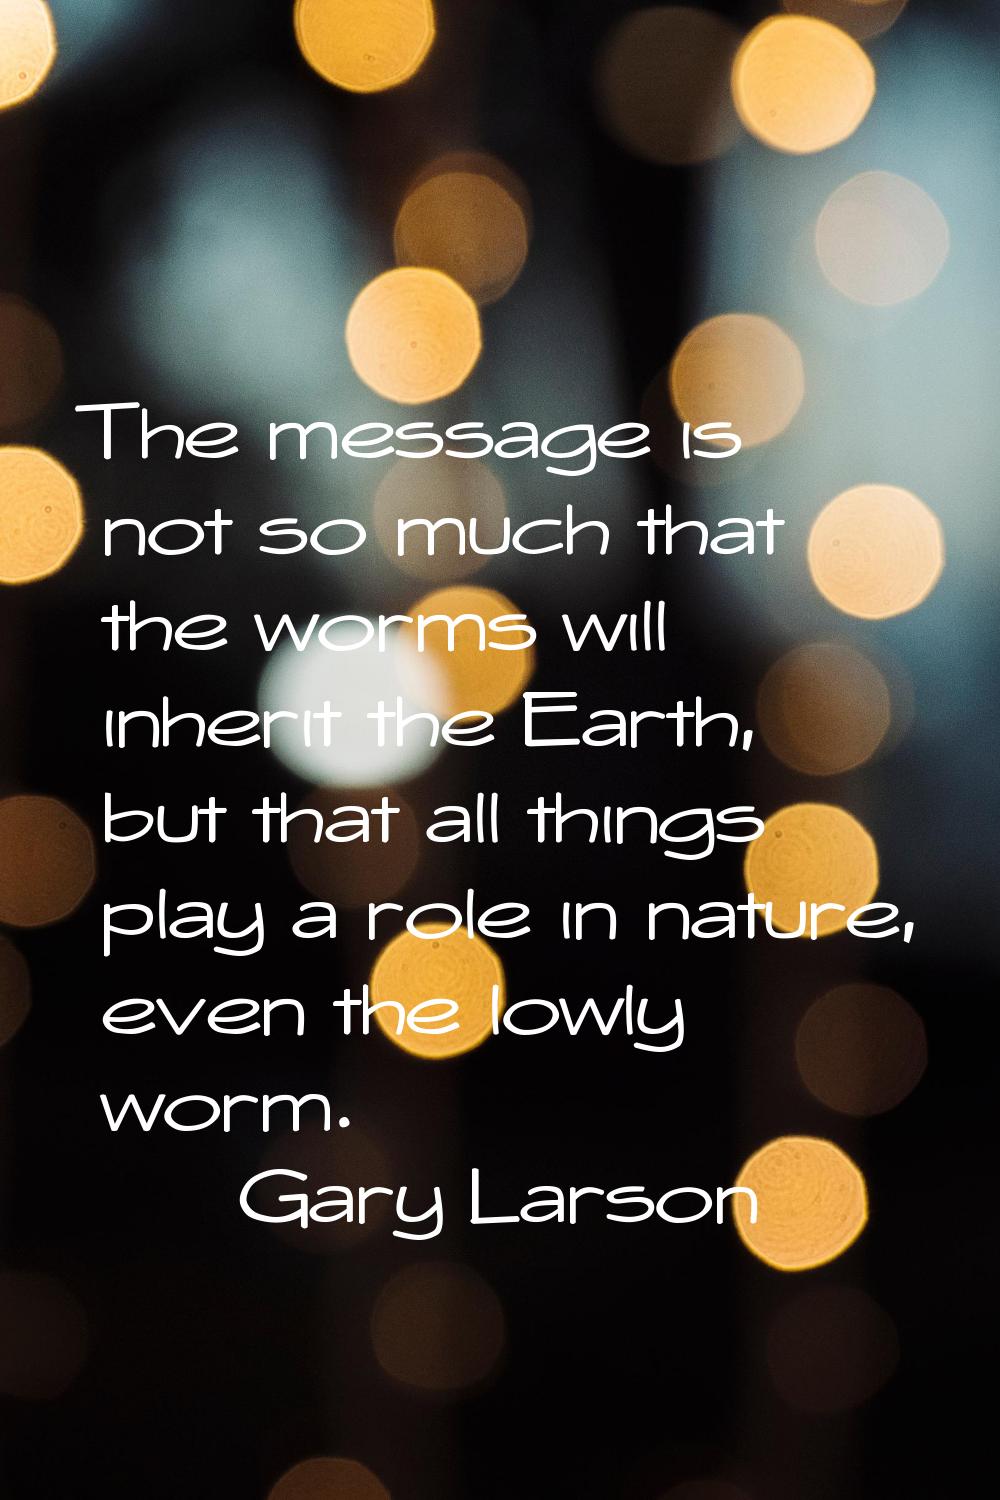 The message is not so much that the worms will inherit the Earth, but that all things play a role i